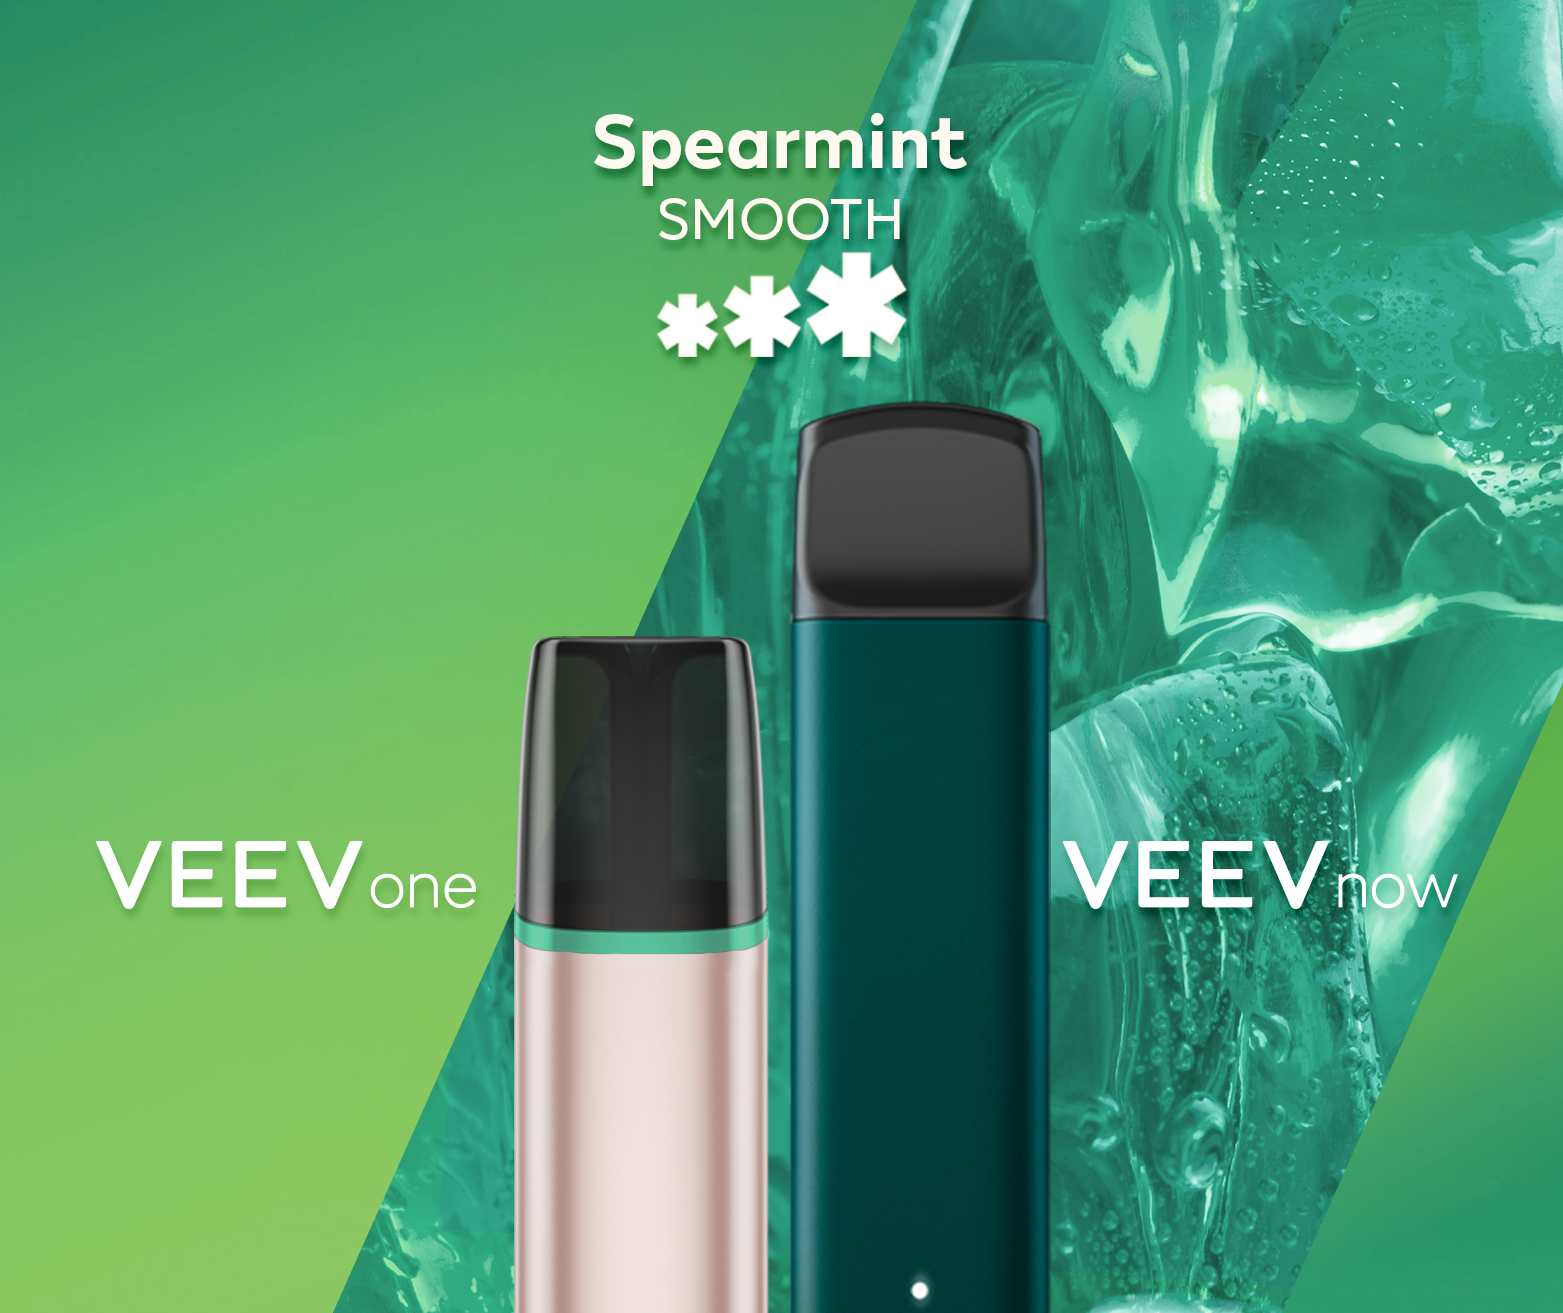 A VEEV ONE pod device and VEEV NOW dispo sable, both in Spearmint flavour.